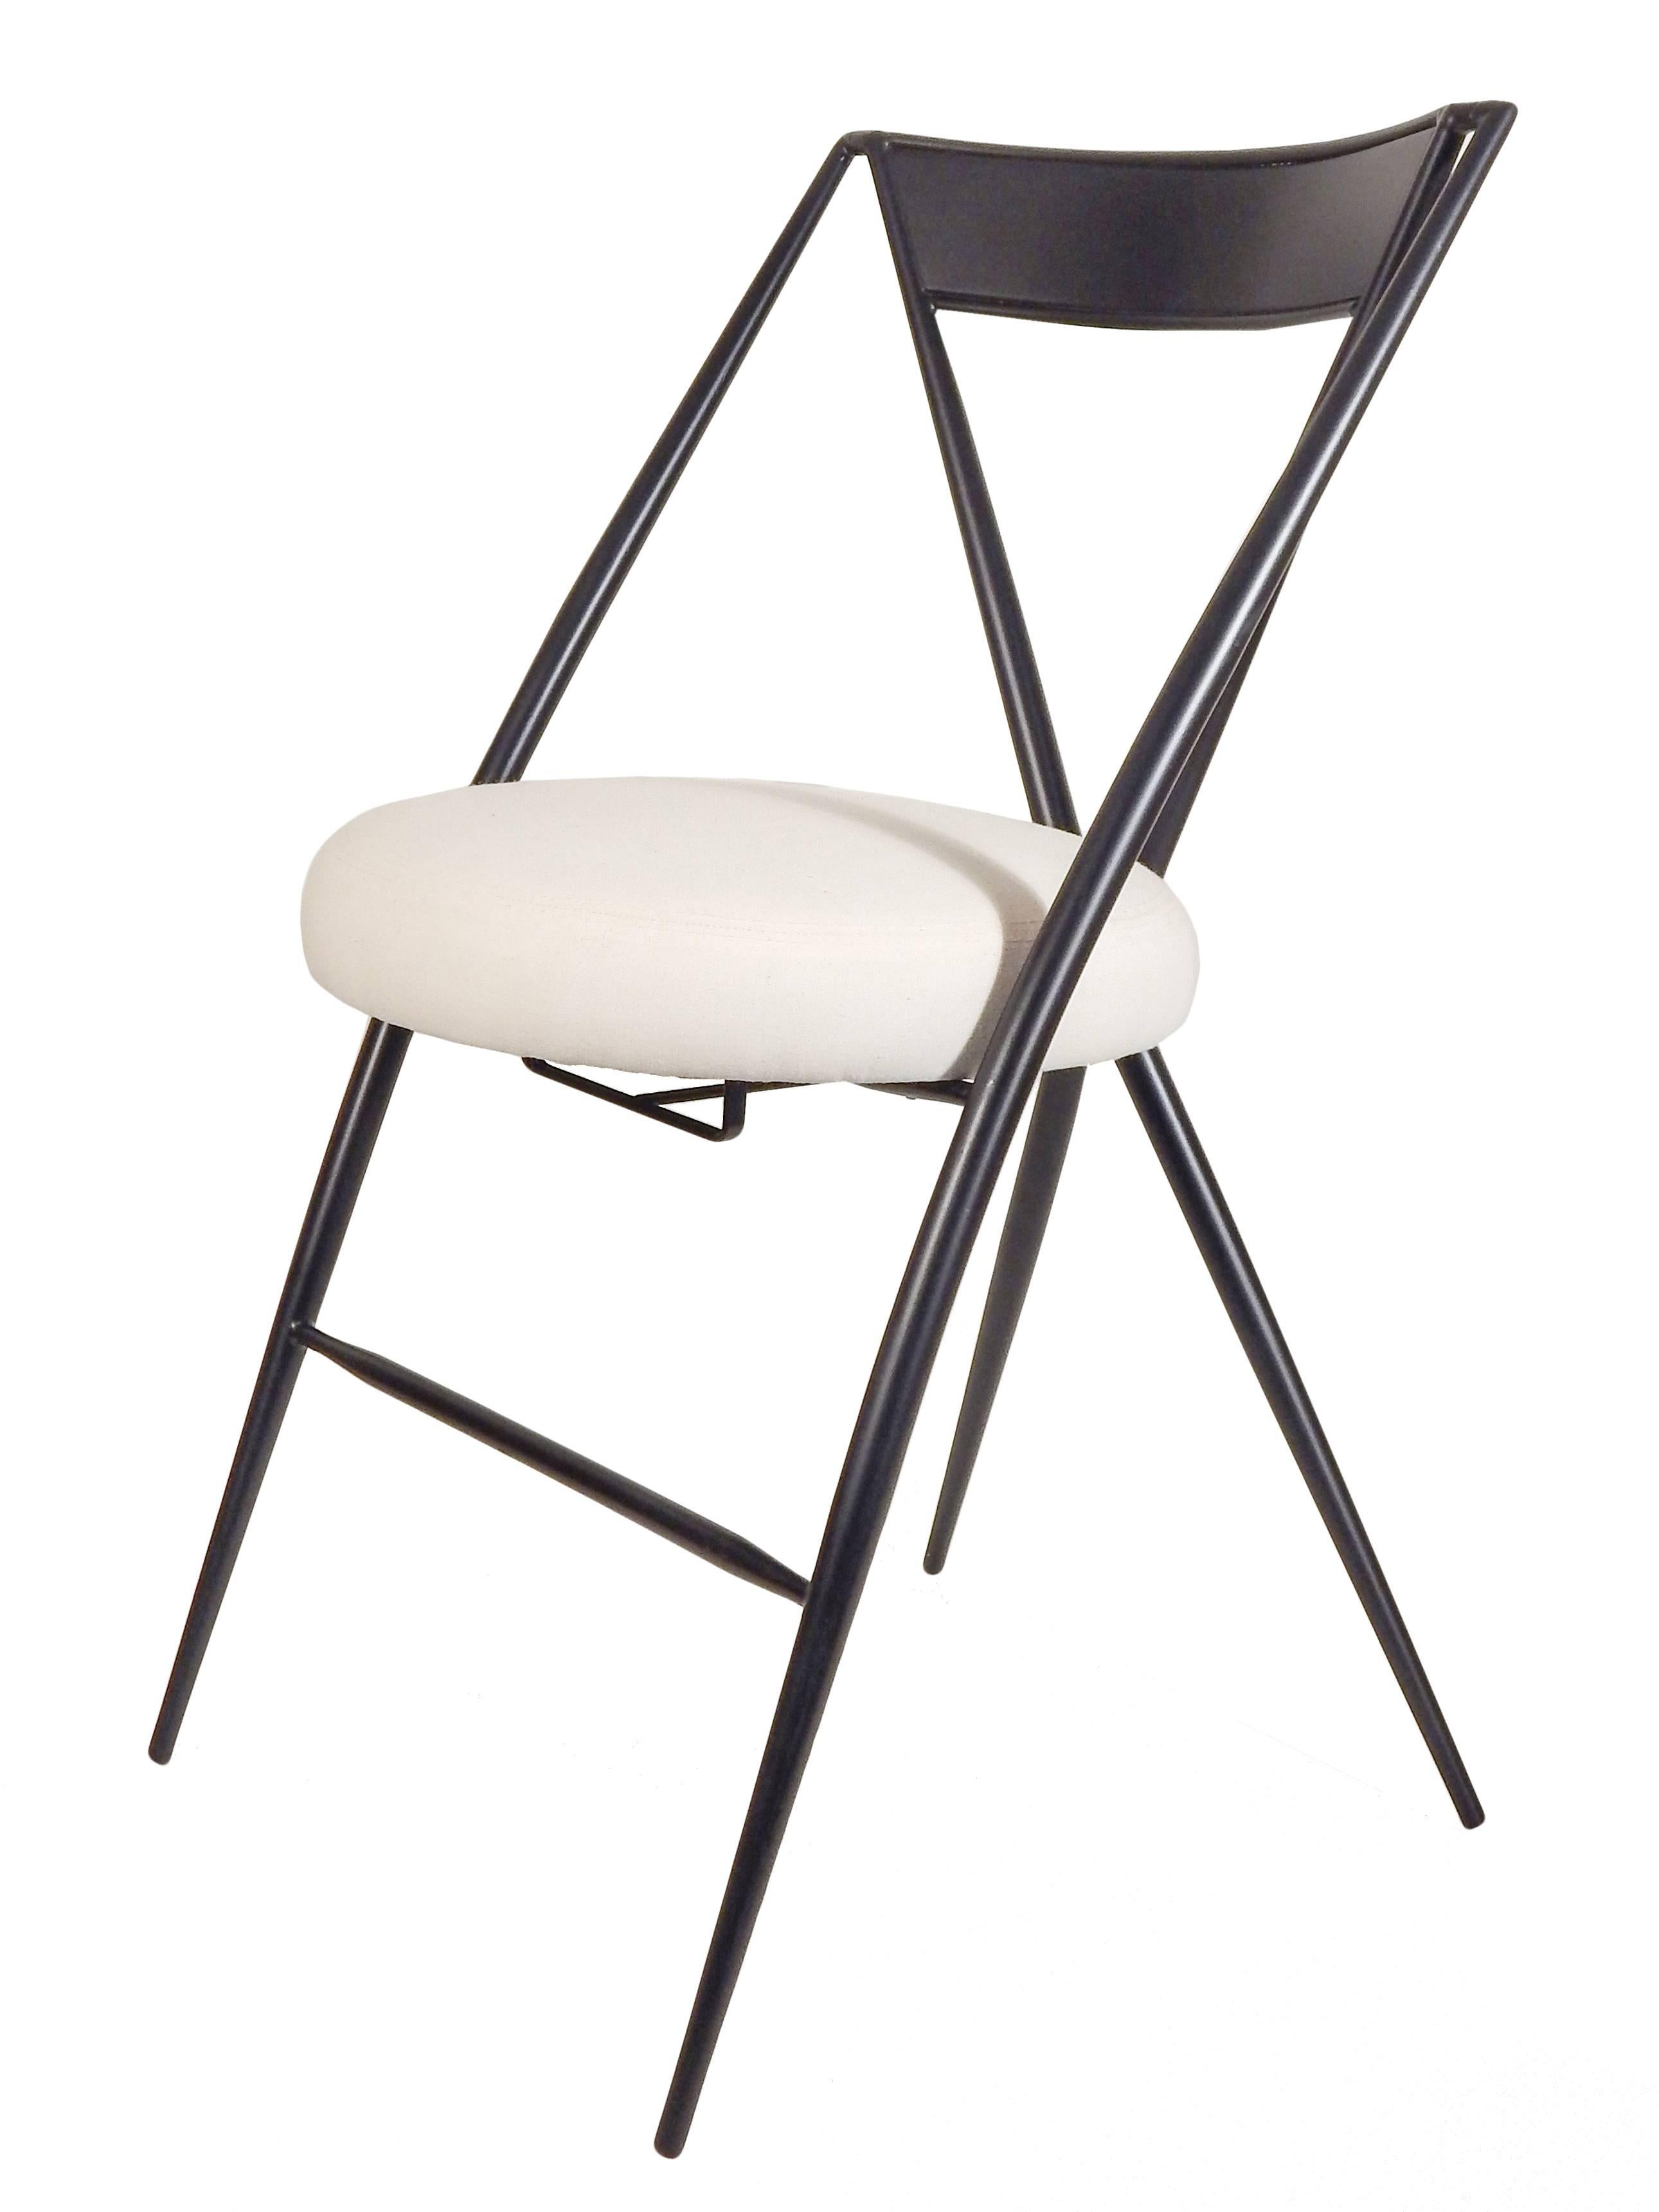 20th Century Pair of Mid-Century Modern Folding Chairs For Sale